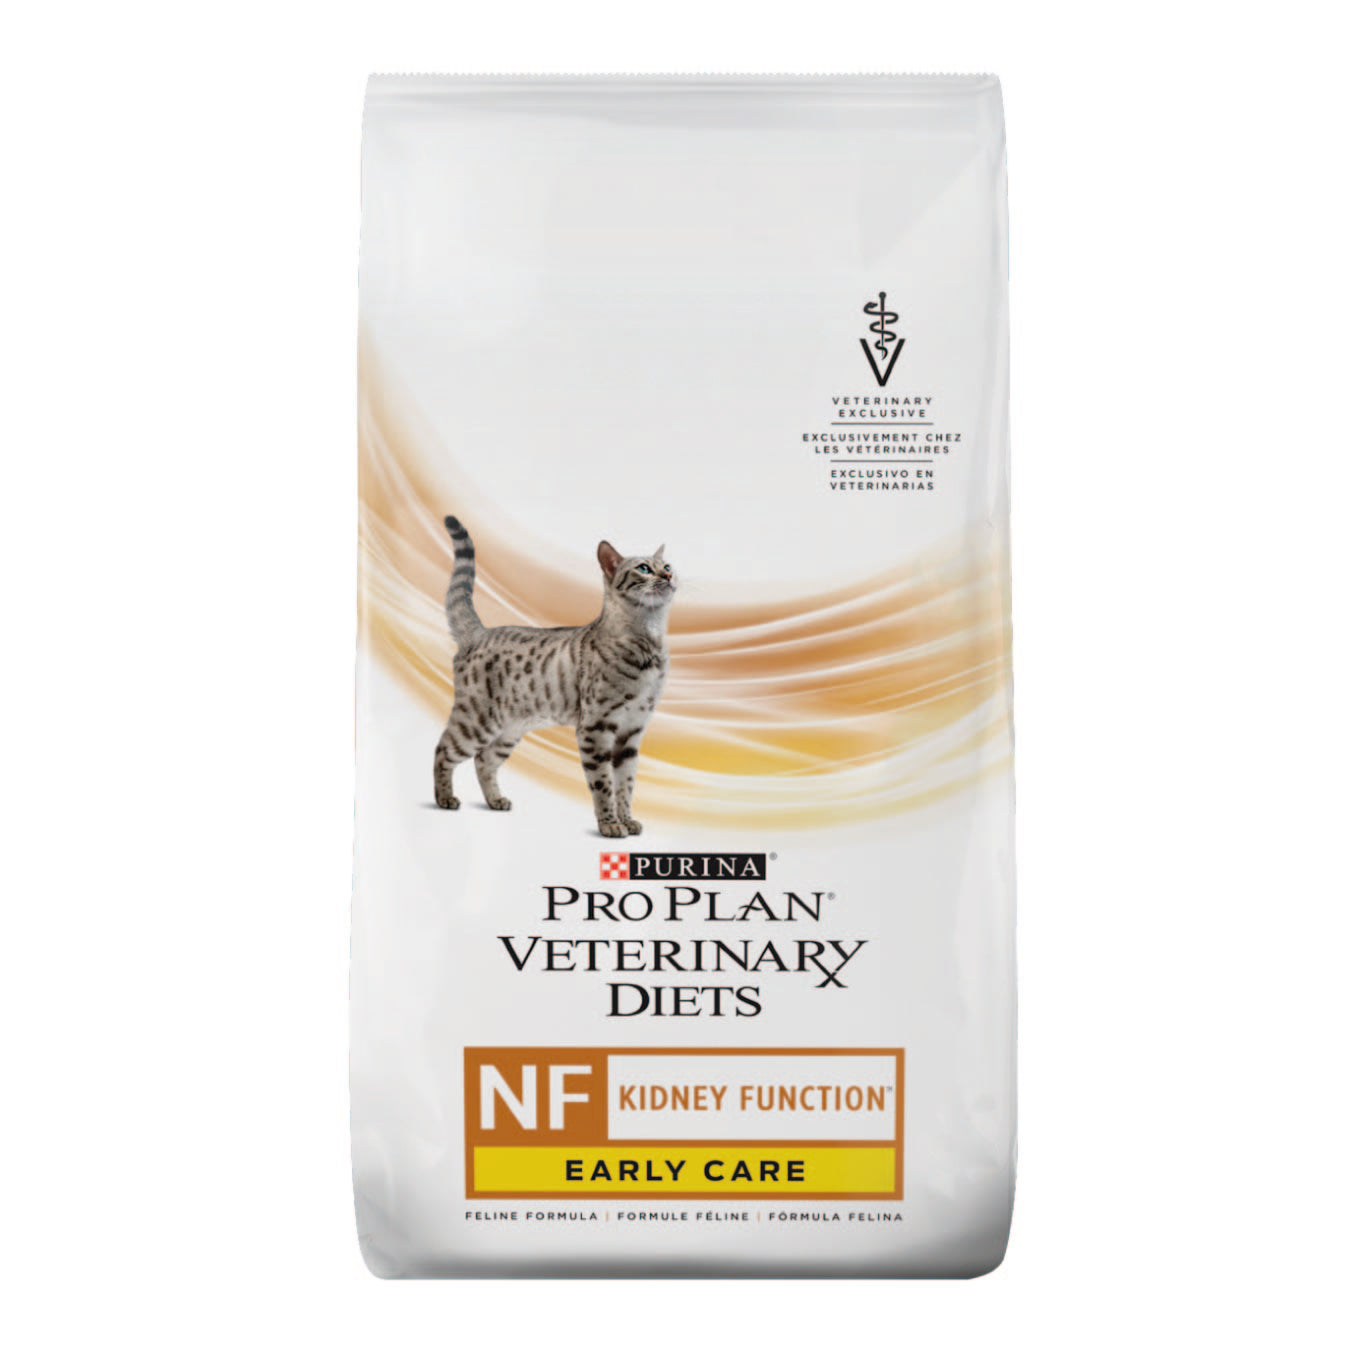 Alimento Gato Pro Plan NF Kidney Function Early Care 2.72 Kg - Veterinary Diets, gato, ProPlan, Mister Mascotas